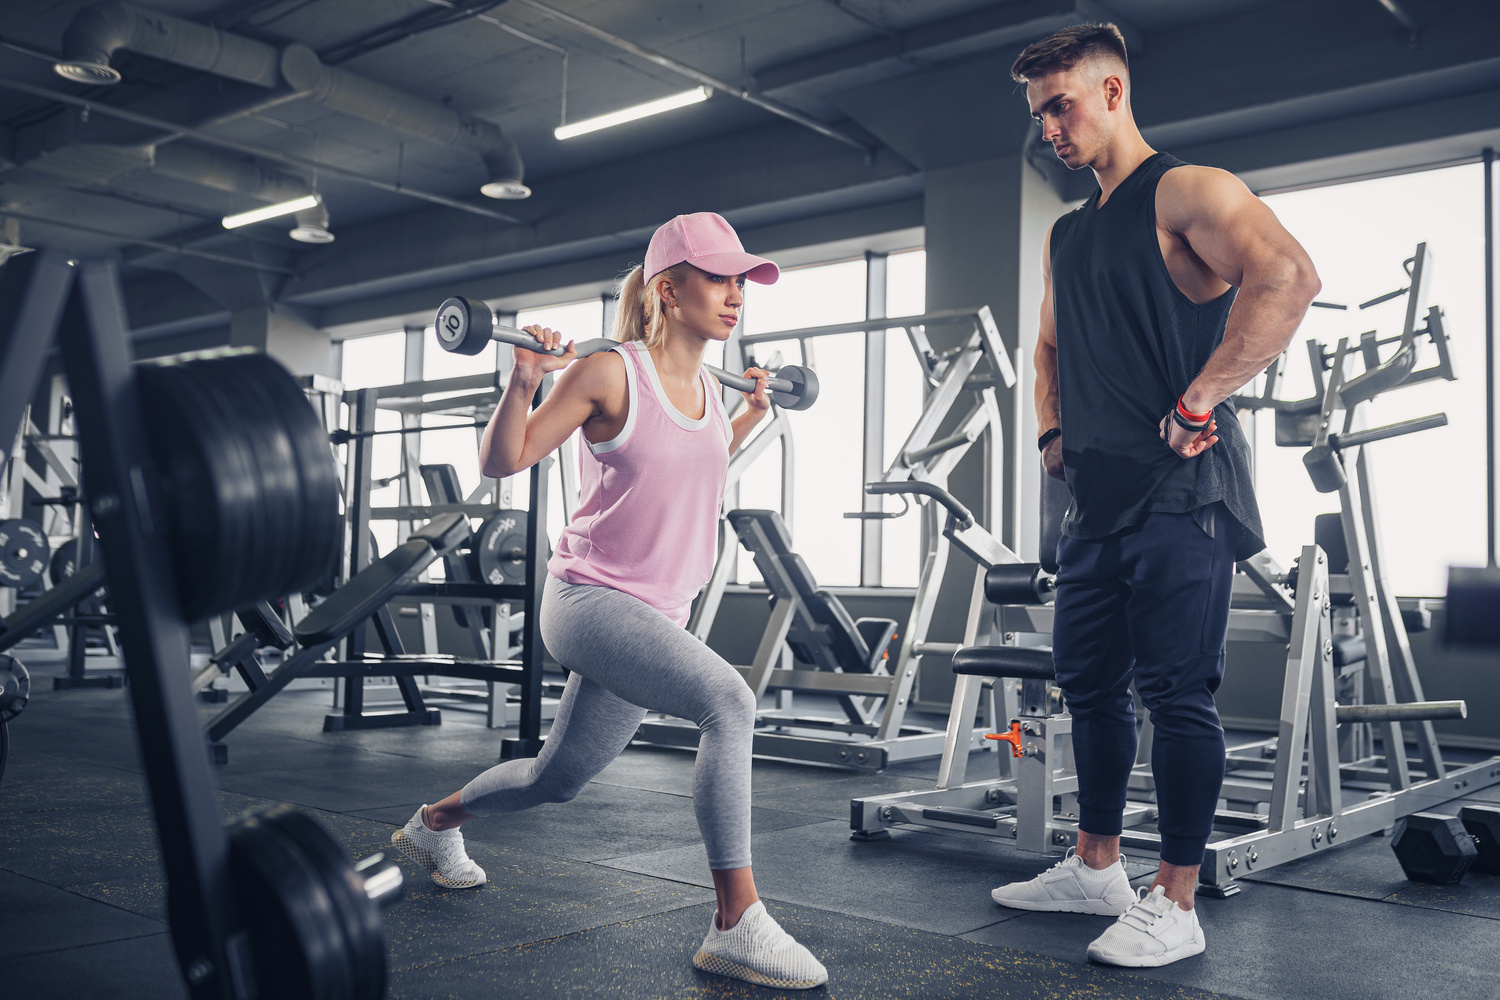 Fitness Coach Training Young Woman at the Gym 